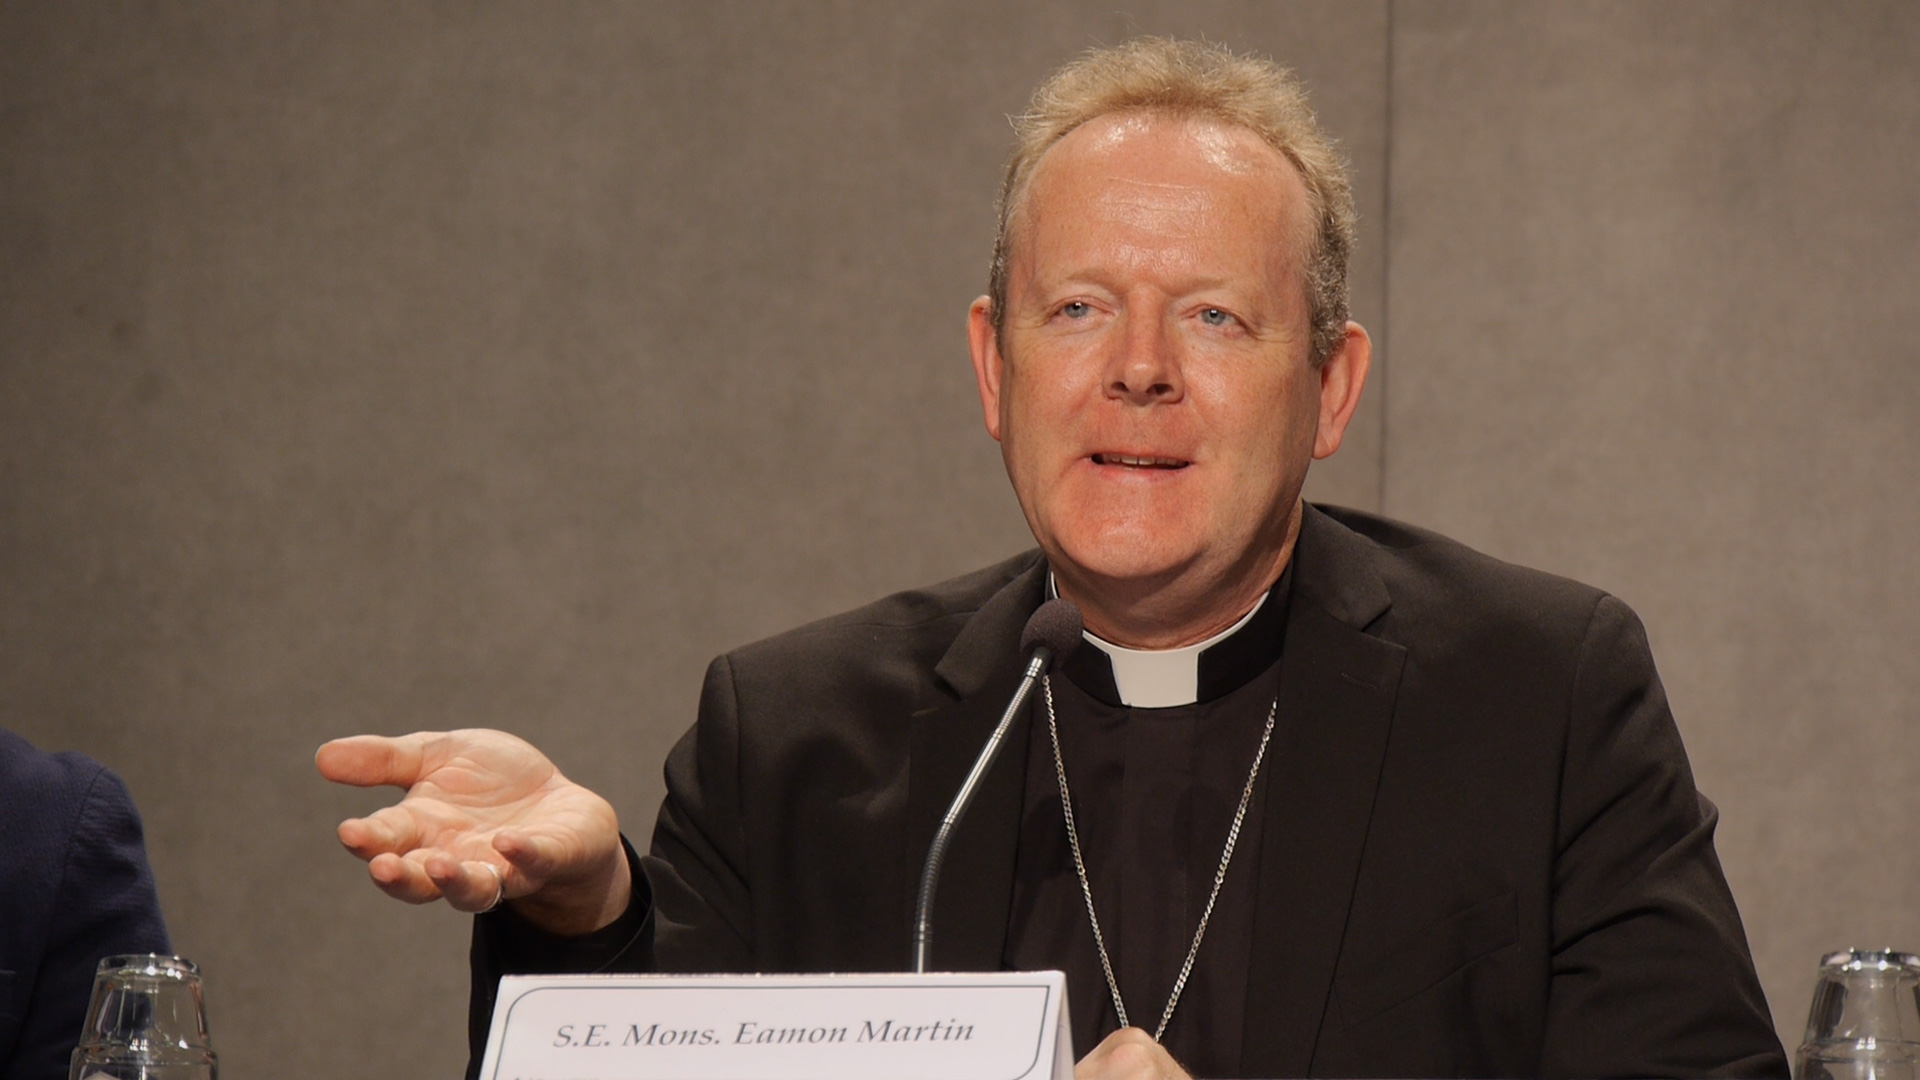 “I feel I have to be an ambassador for the Synod…”